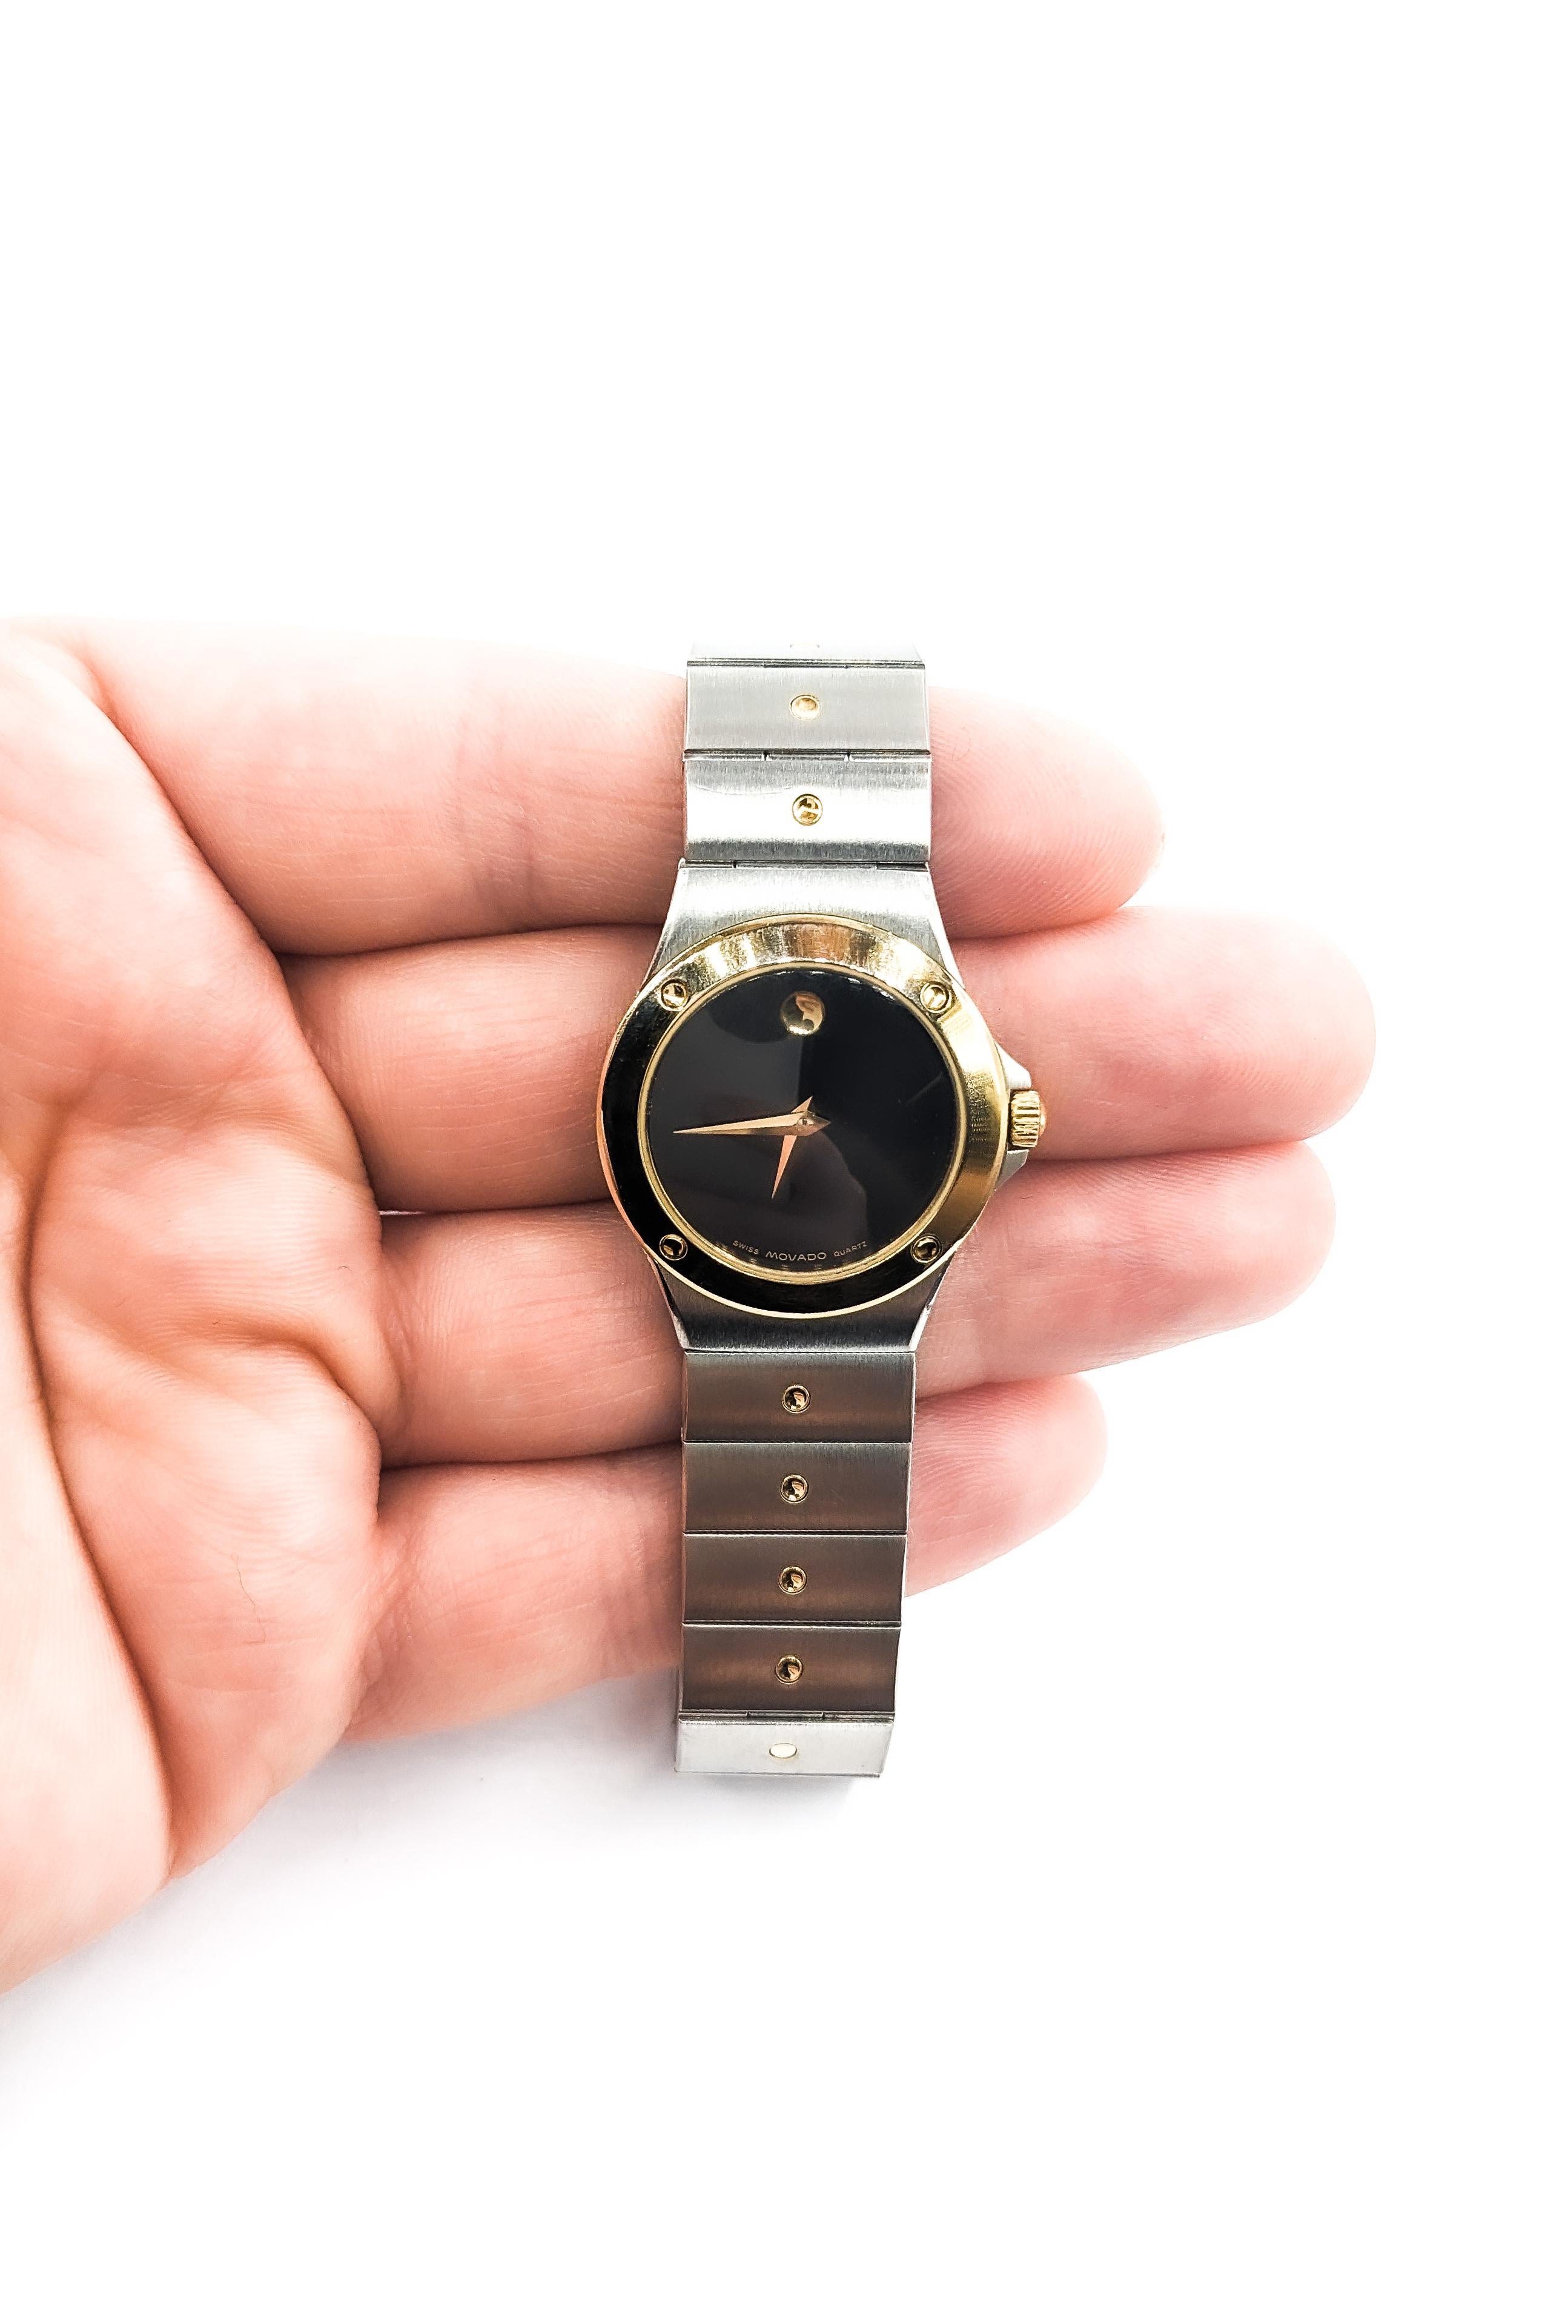 Movado Ladies Two Tone Classic Museum watch In Stainless Steel

The Movado Ladies Two Tone Classic Museum watch is a stunning piece that epitomizes elegance and sophistication. This exquisite timepiece is constructed from stainless steel, offering